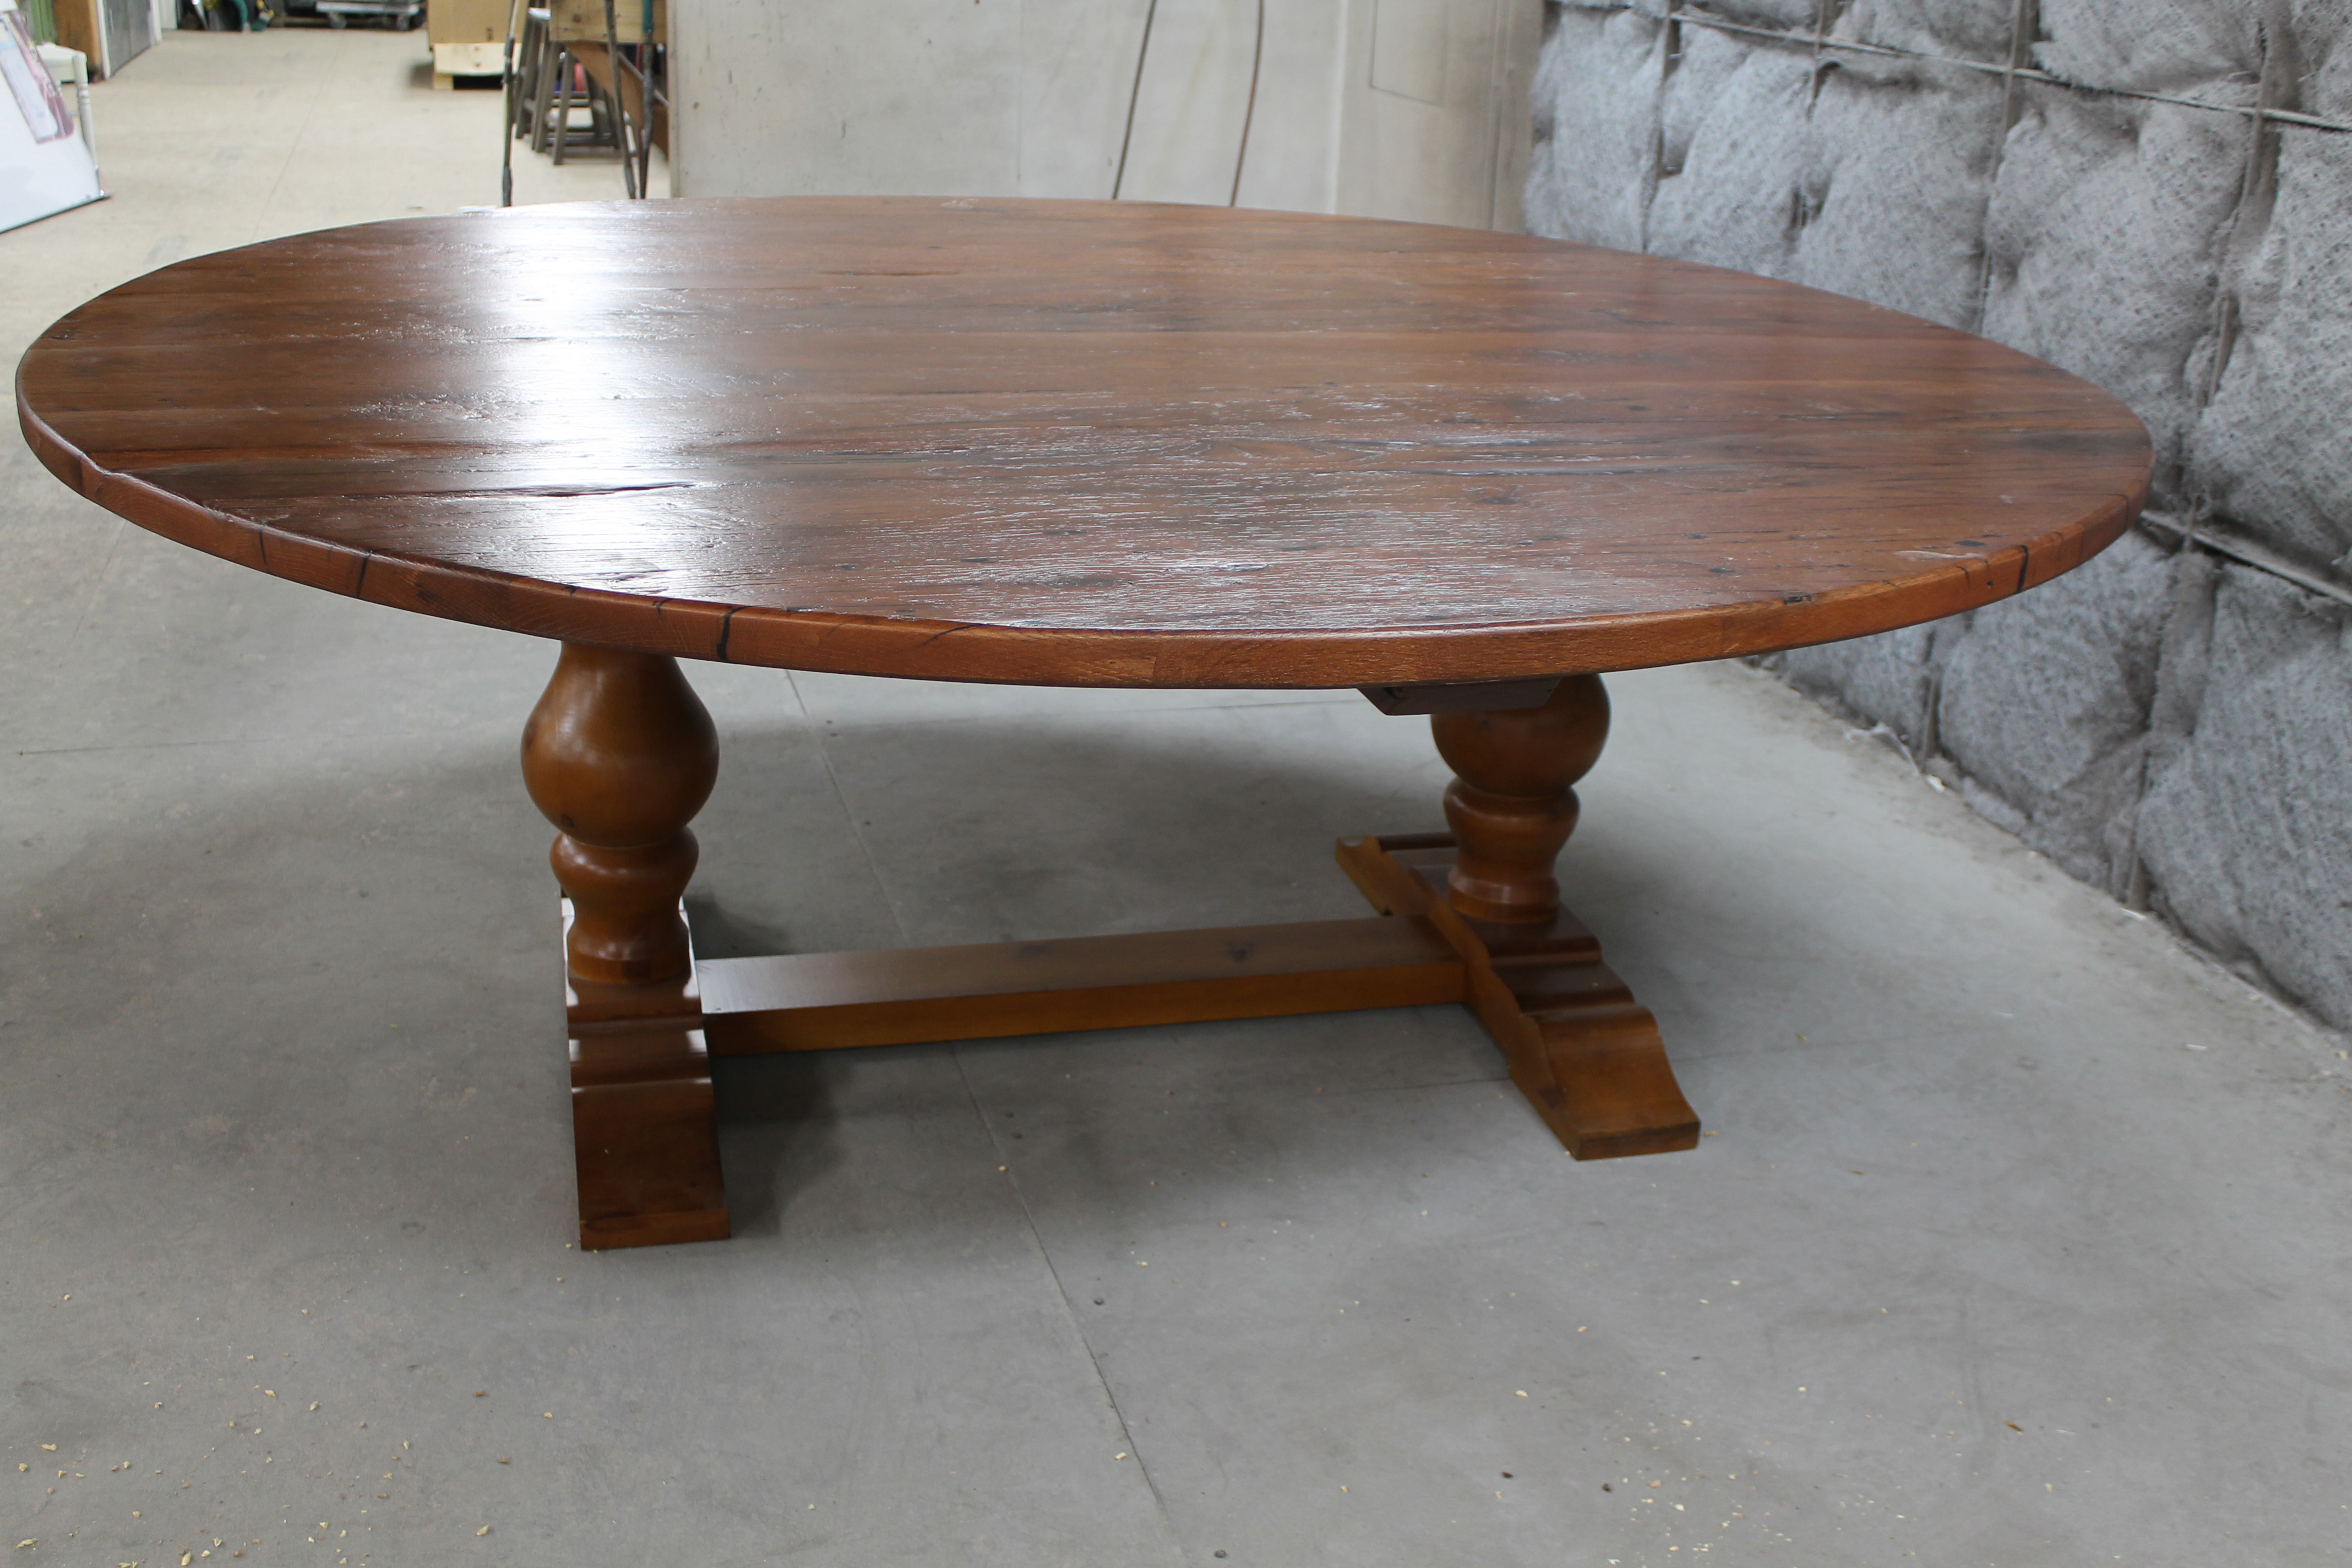 84 Inch Round Trestle Table, 84 Inch Round Dining Table With Lazy Susan